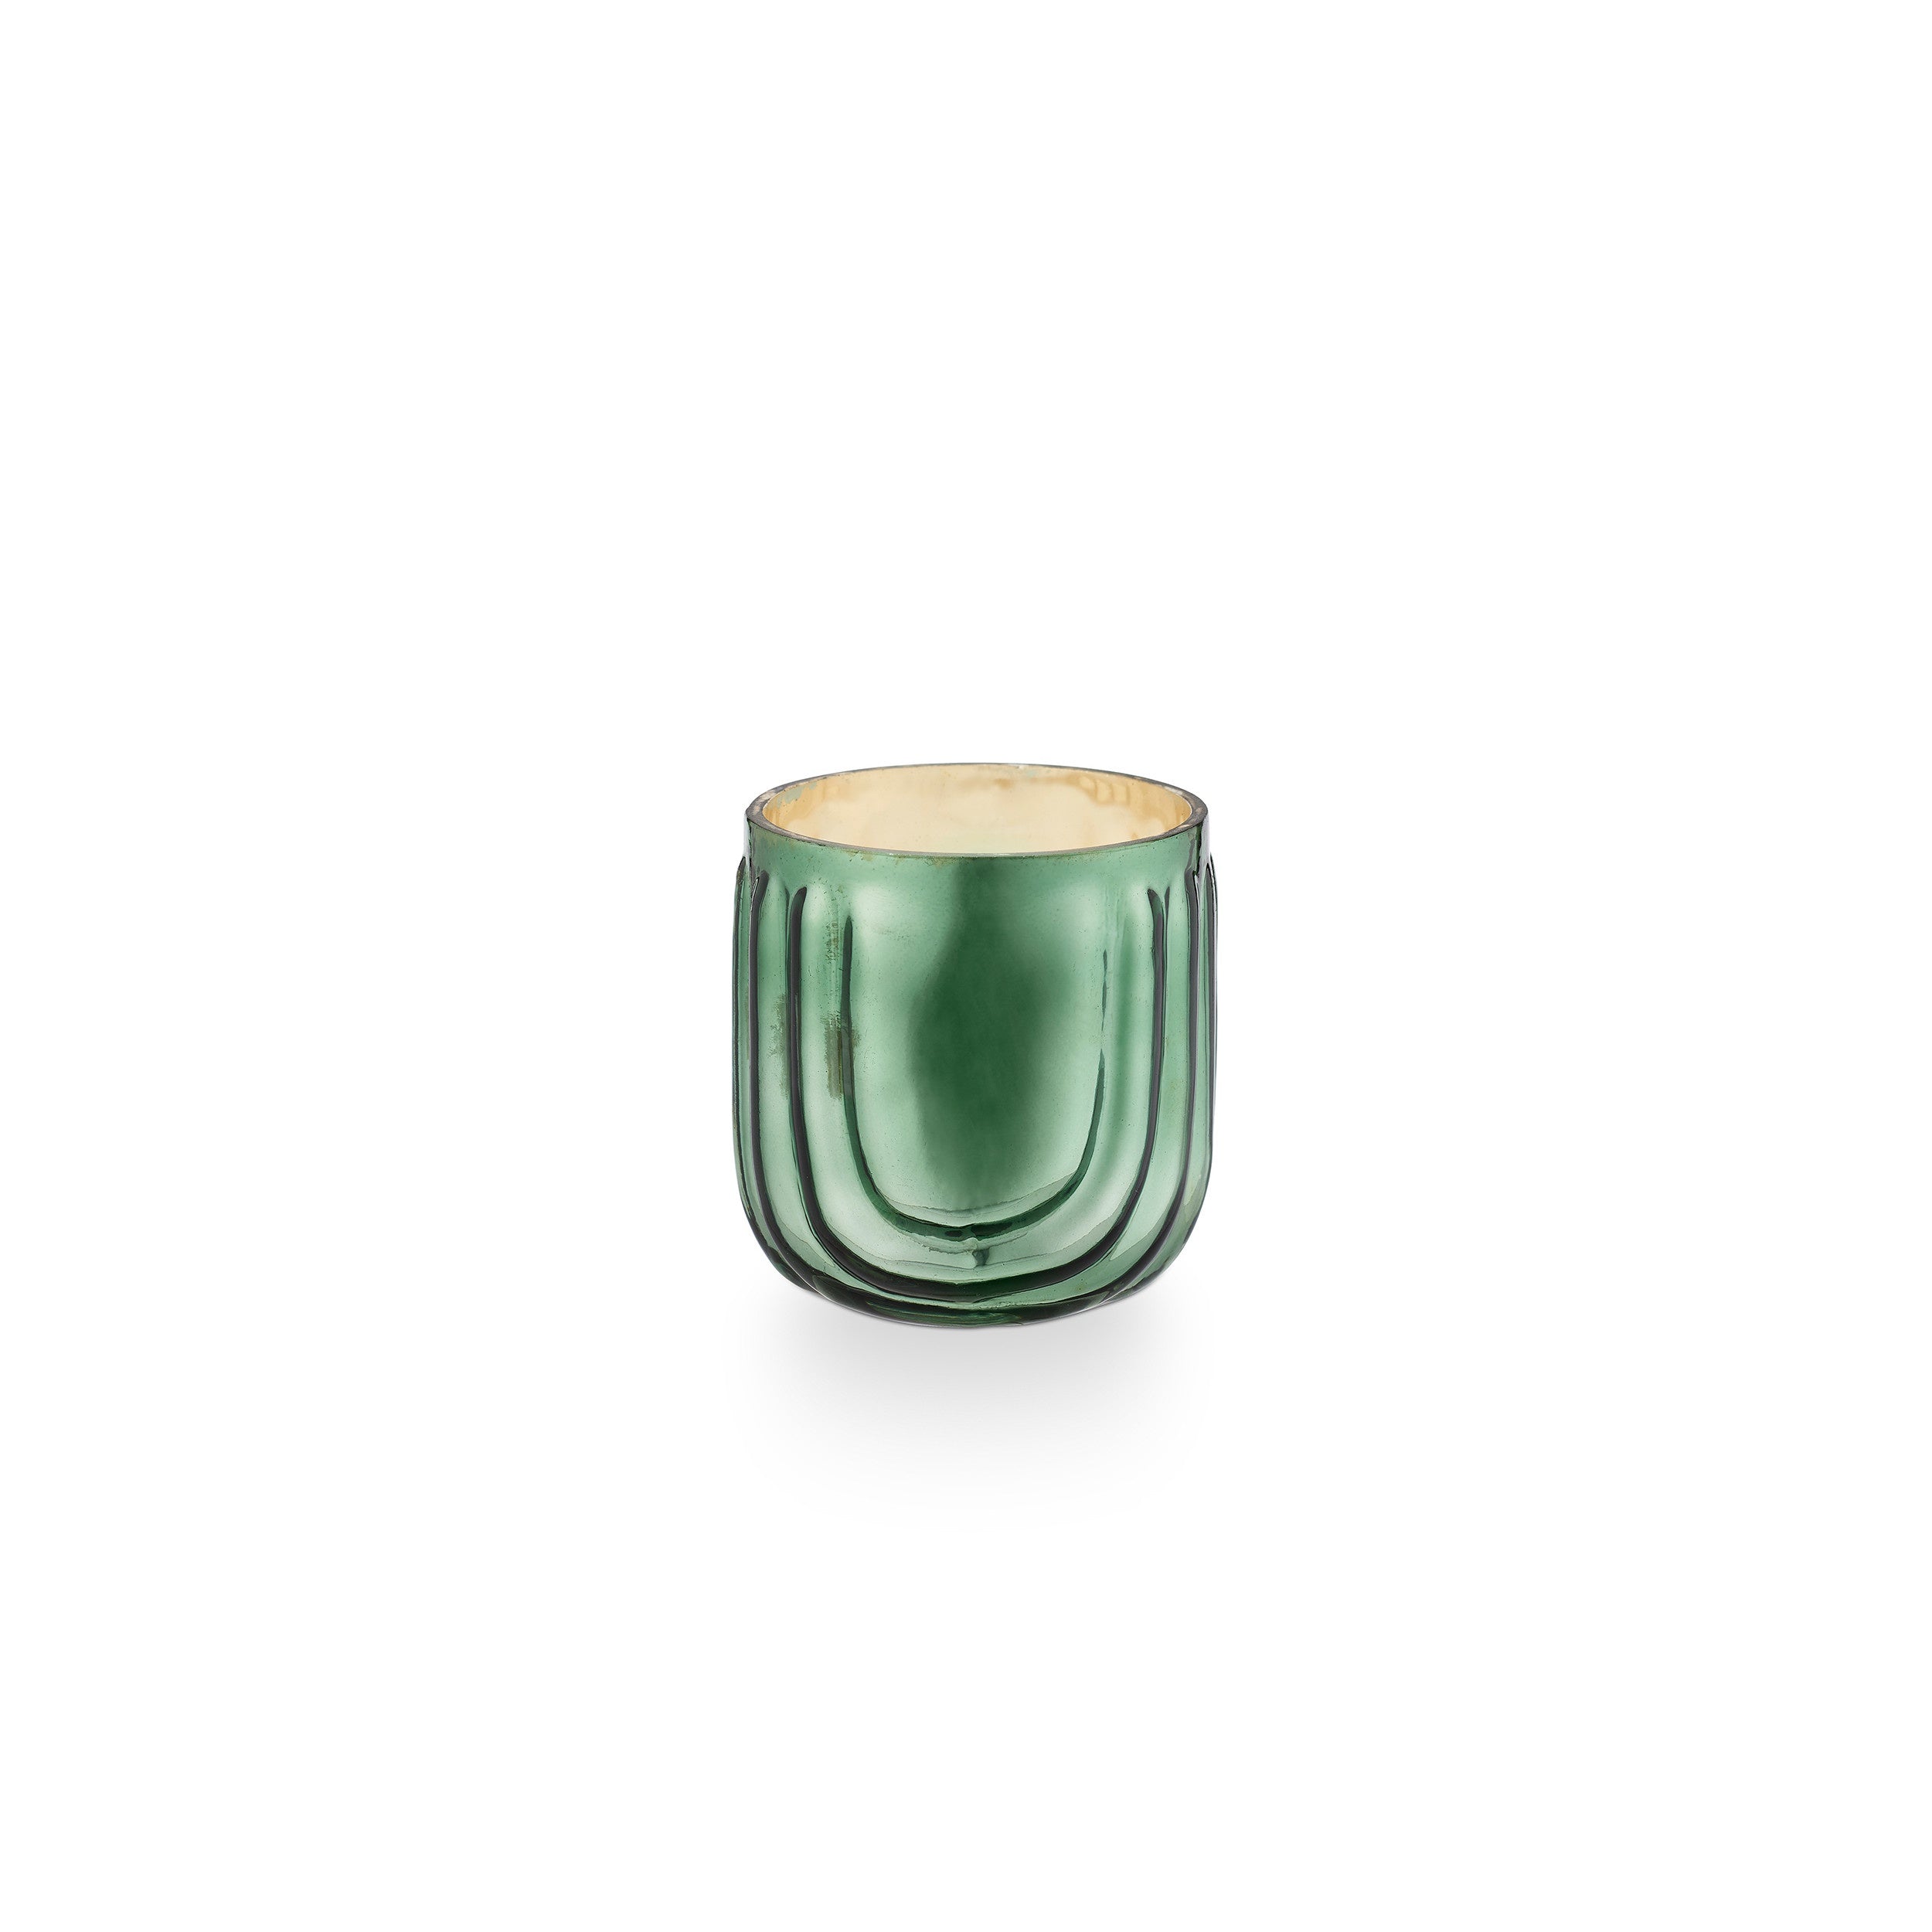 The Balsam + Cedar Pressed Glass Candle